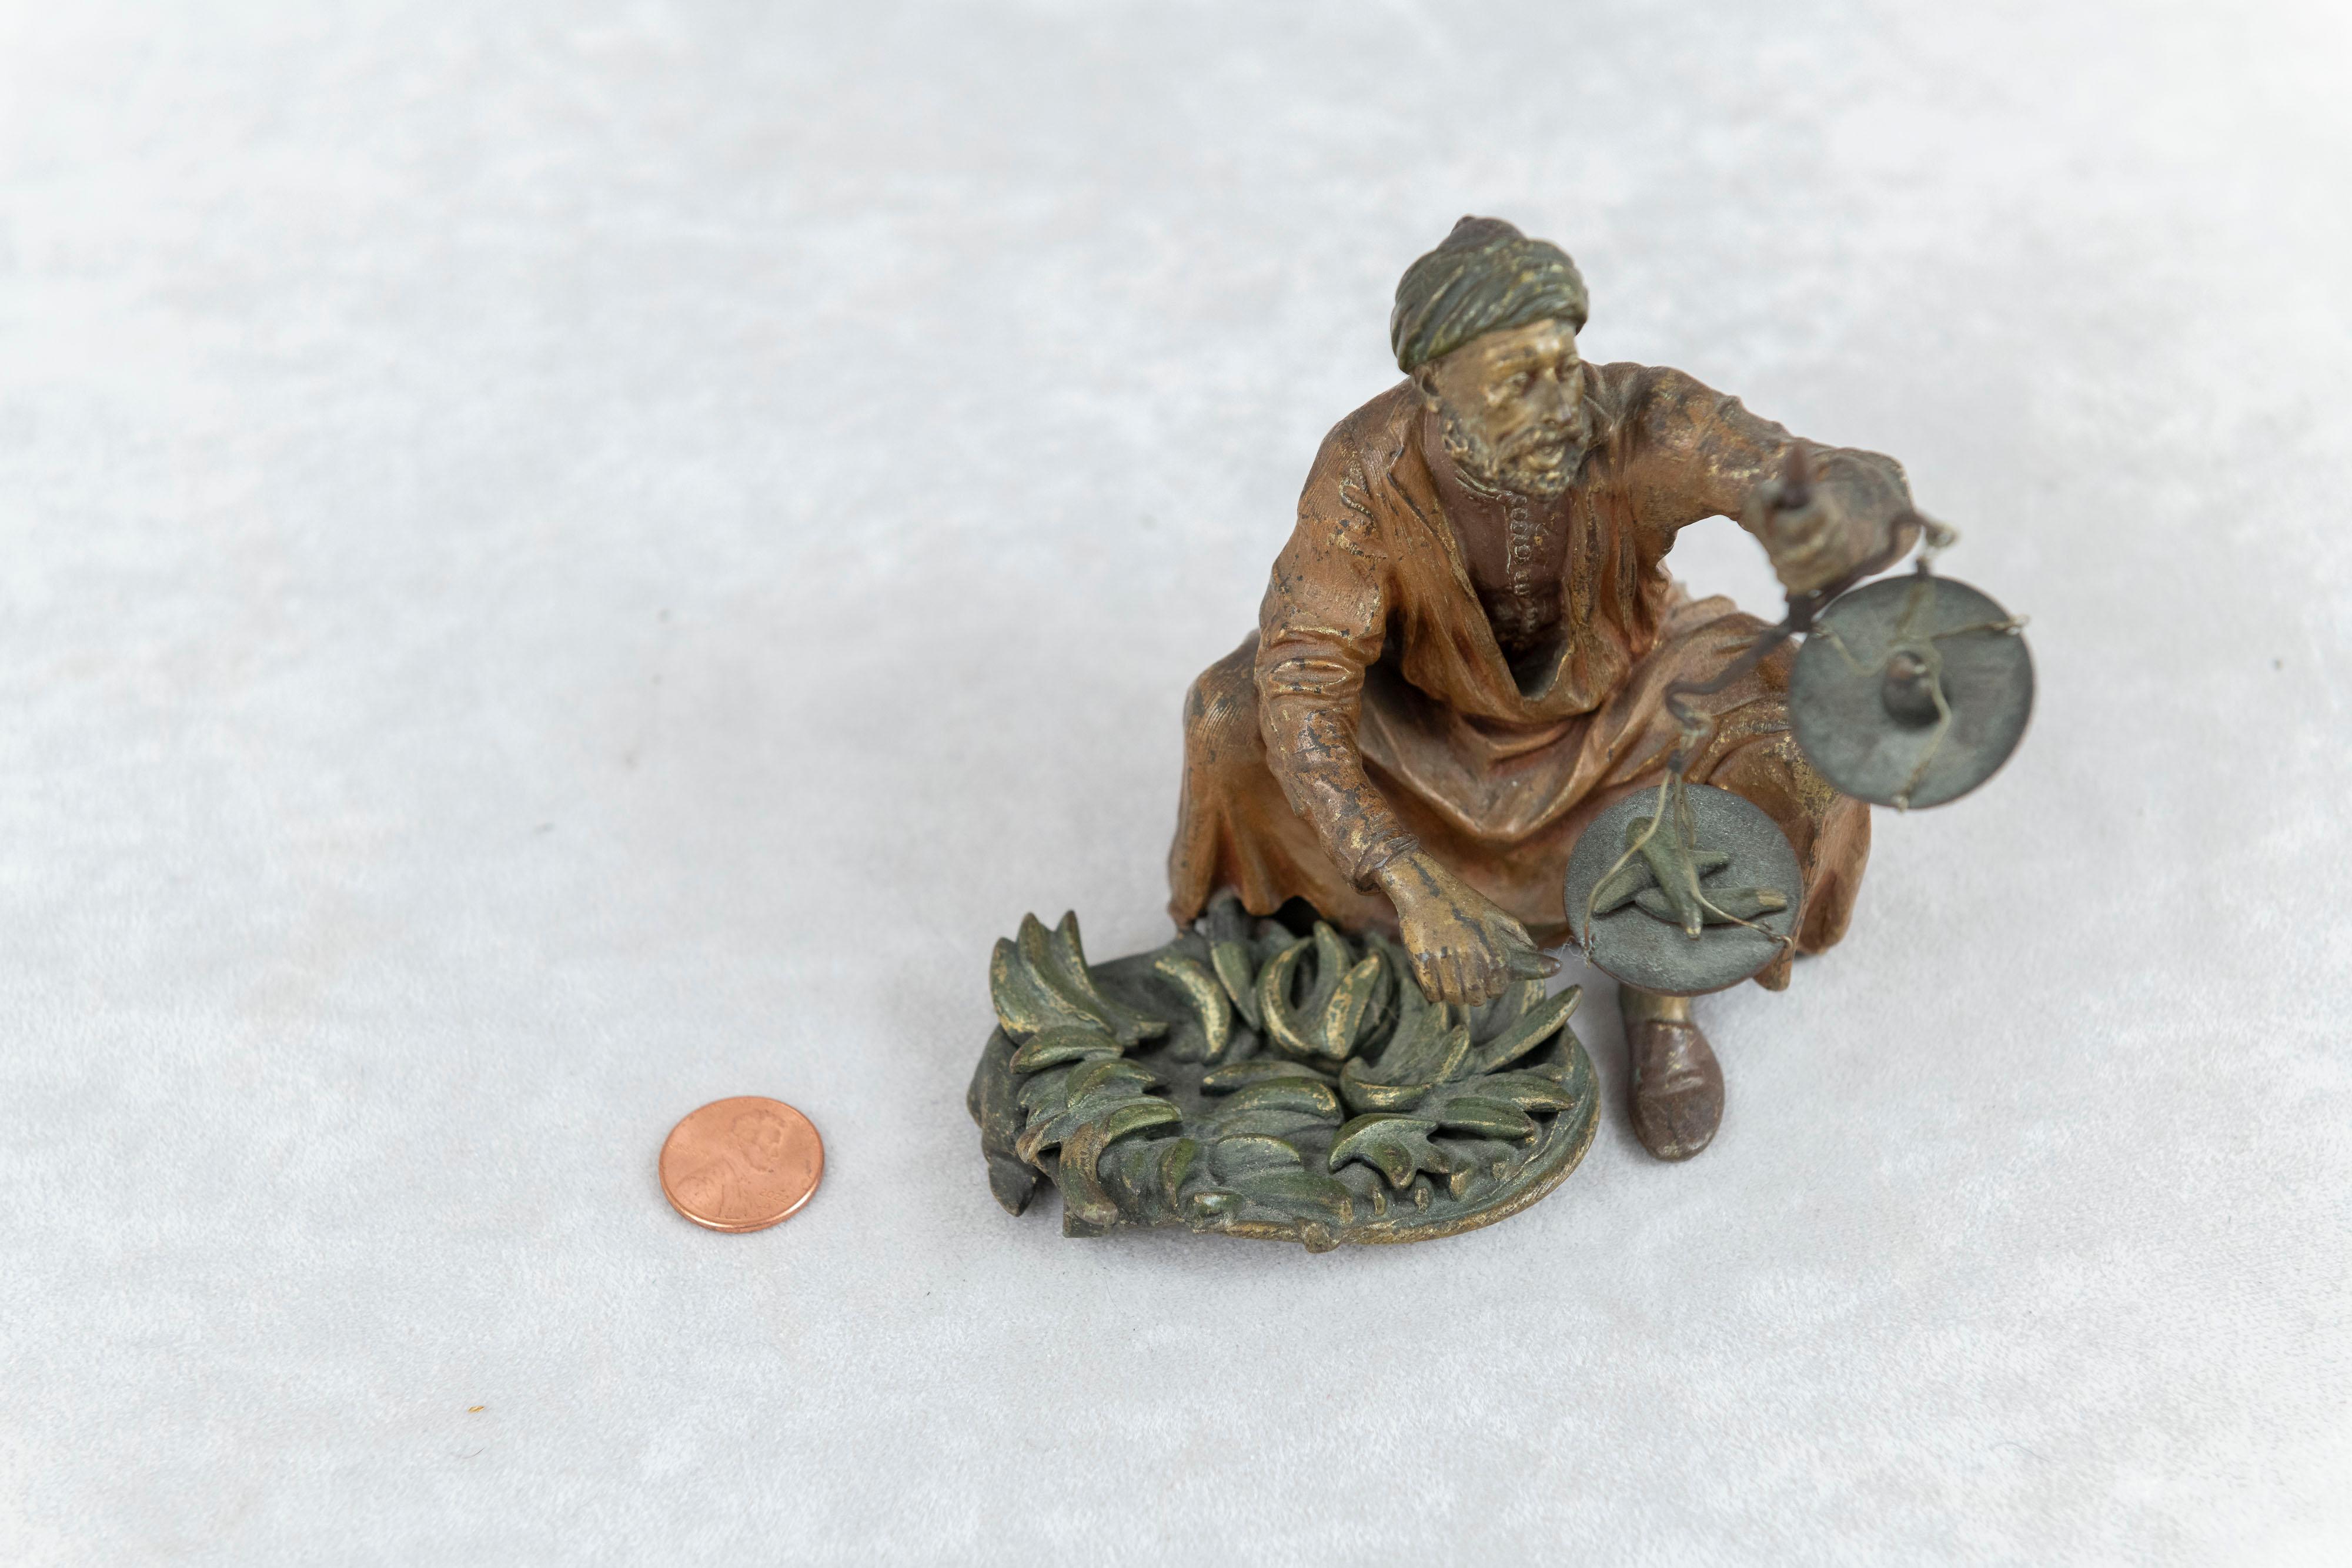  An unusual cold painted Vienna bronze of a seated man holding a little scale in his left hand. The scale has a small weight on the scale while a banana is weighing heavier on the other side. An example of Bergmann's work that we have never seen.